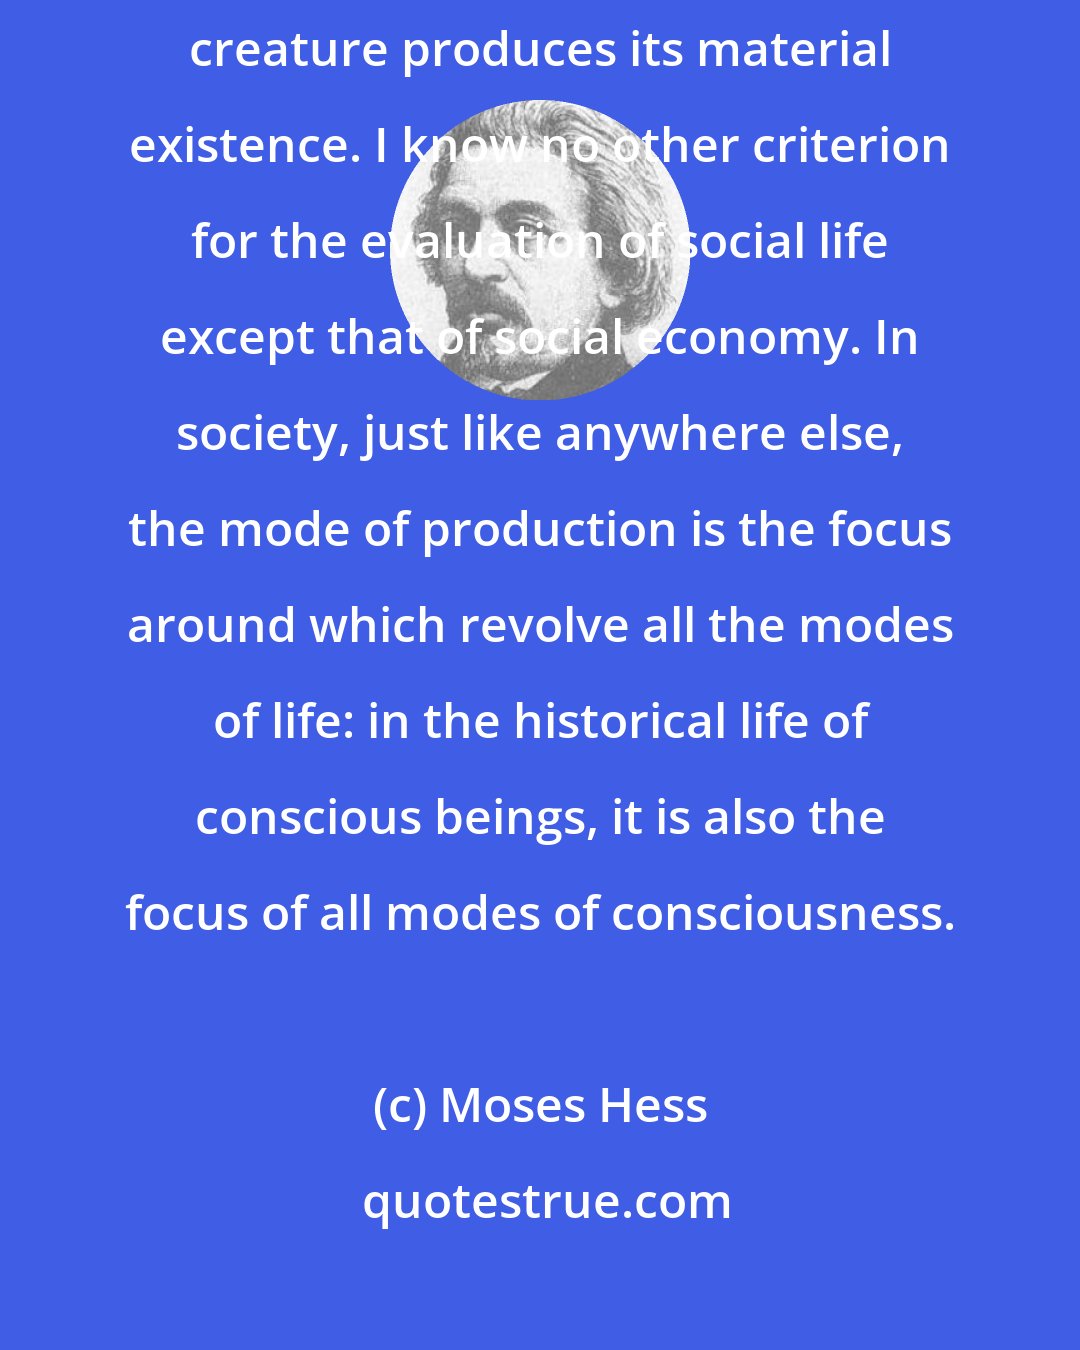 Moses Hess: The focus of all life is its economy, the mode through which every living creature produces its material existence. I know no other criterion for the evaluation of social life except that of social economy. In society, just like anywhere else, the mode of production is the focus around which revolve all the modes of life: in the historical life of conscious beings, it is also the focus of all modes of consciousness.